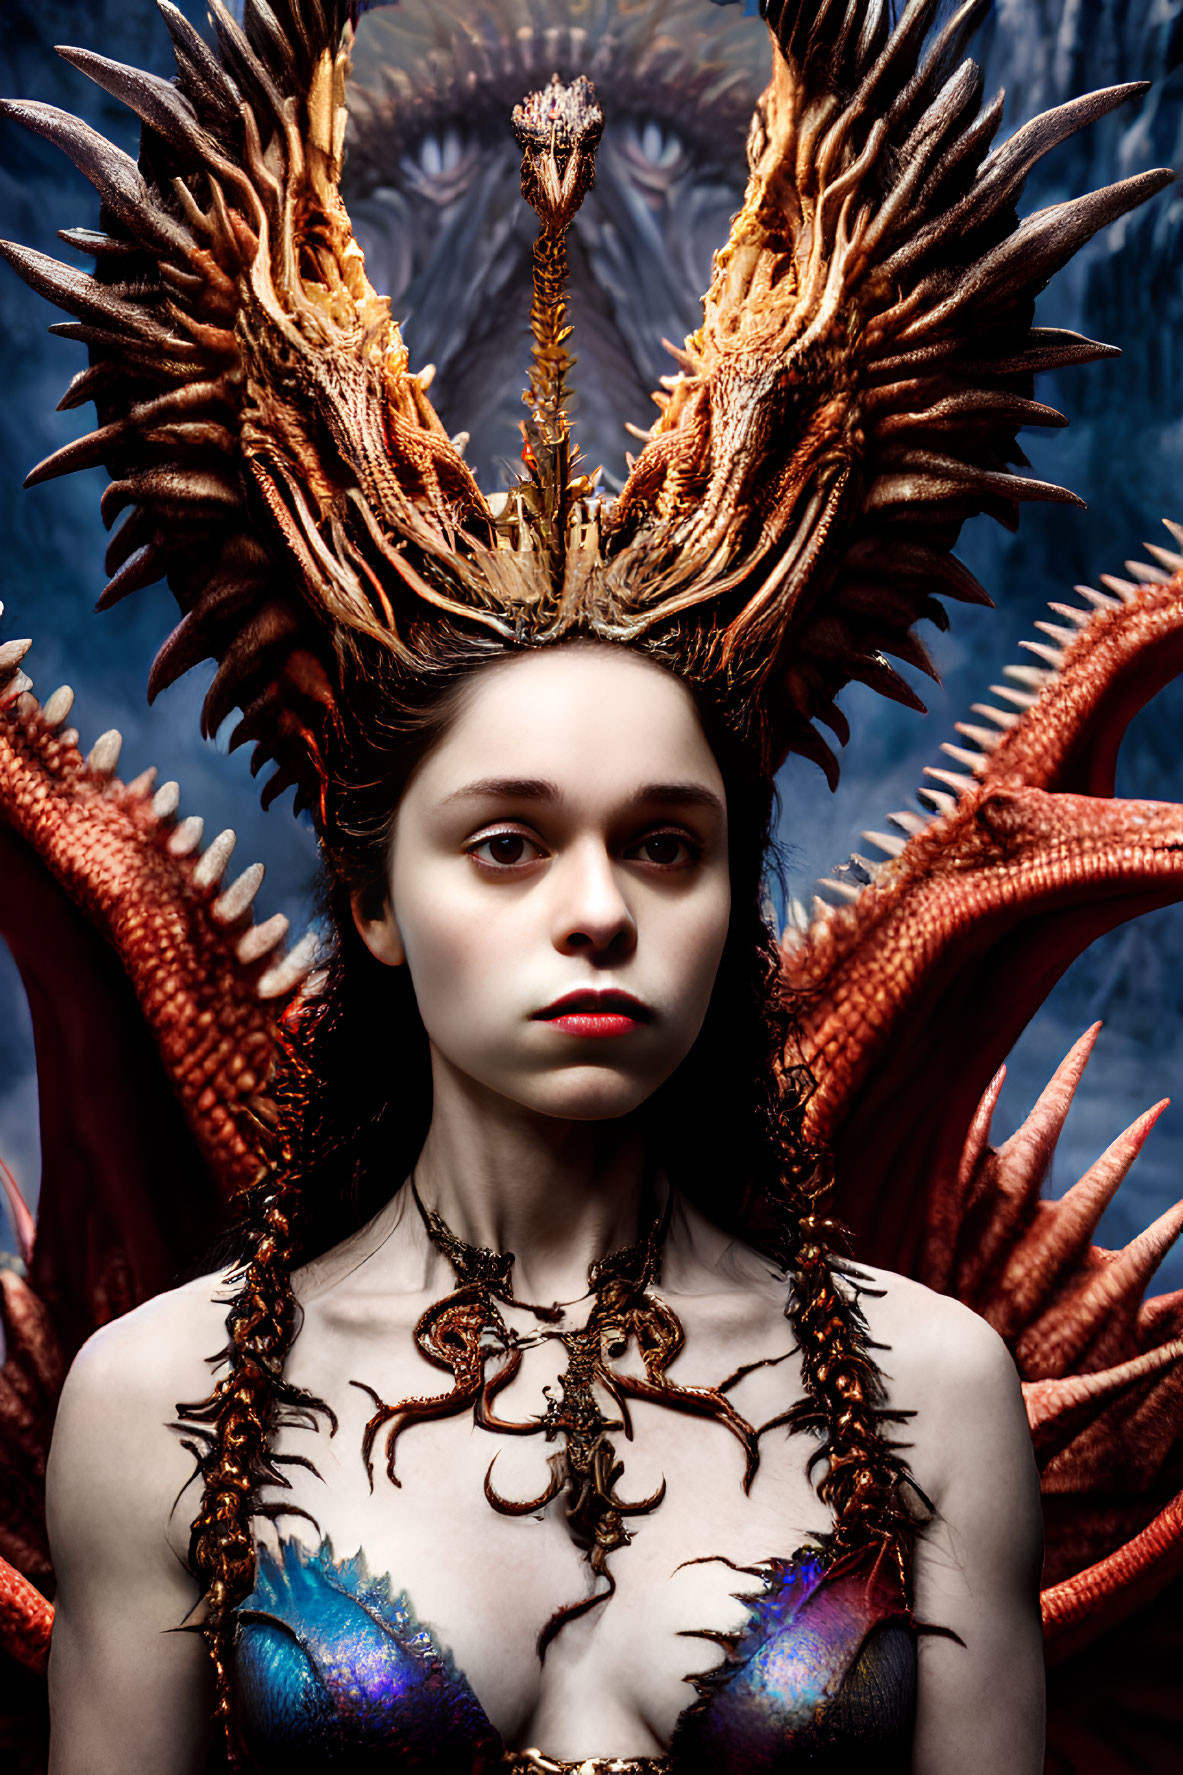 Pale-skinned woman with dragon-themed headdress and jewelry in fantastical setting